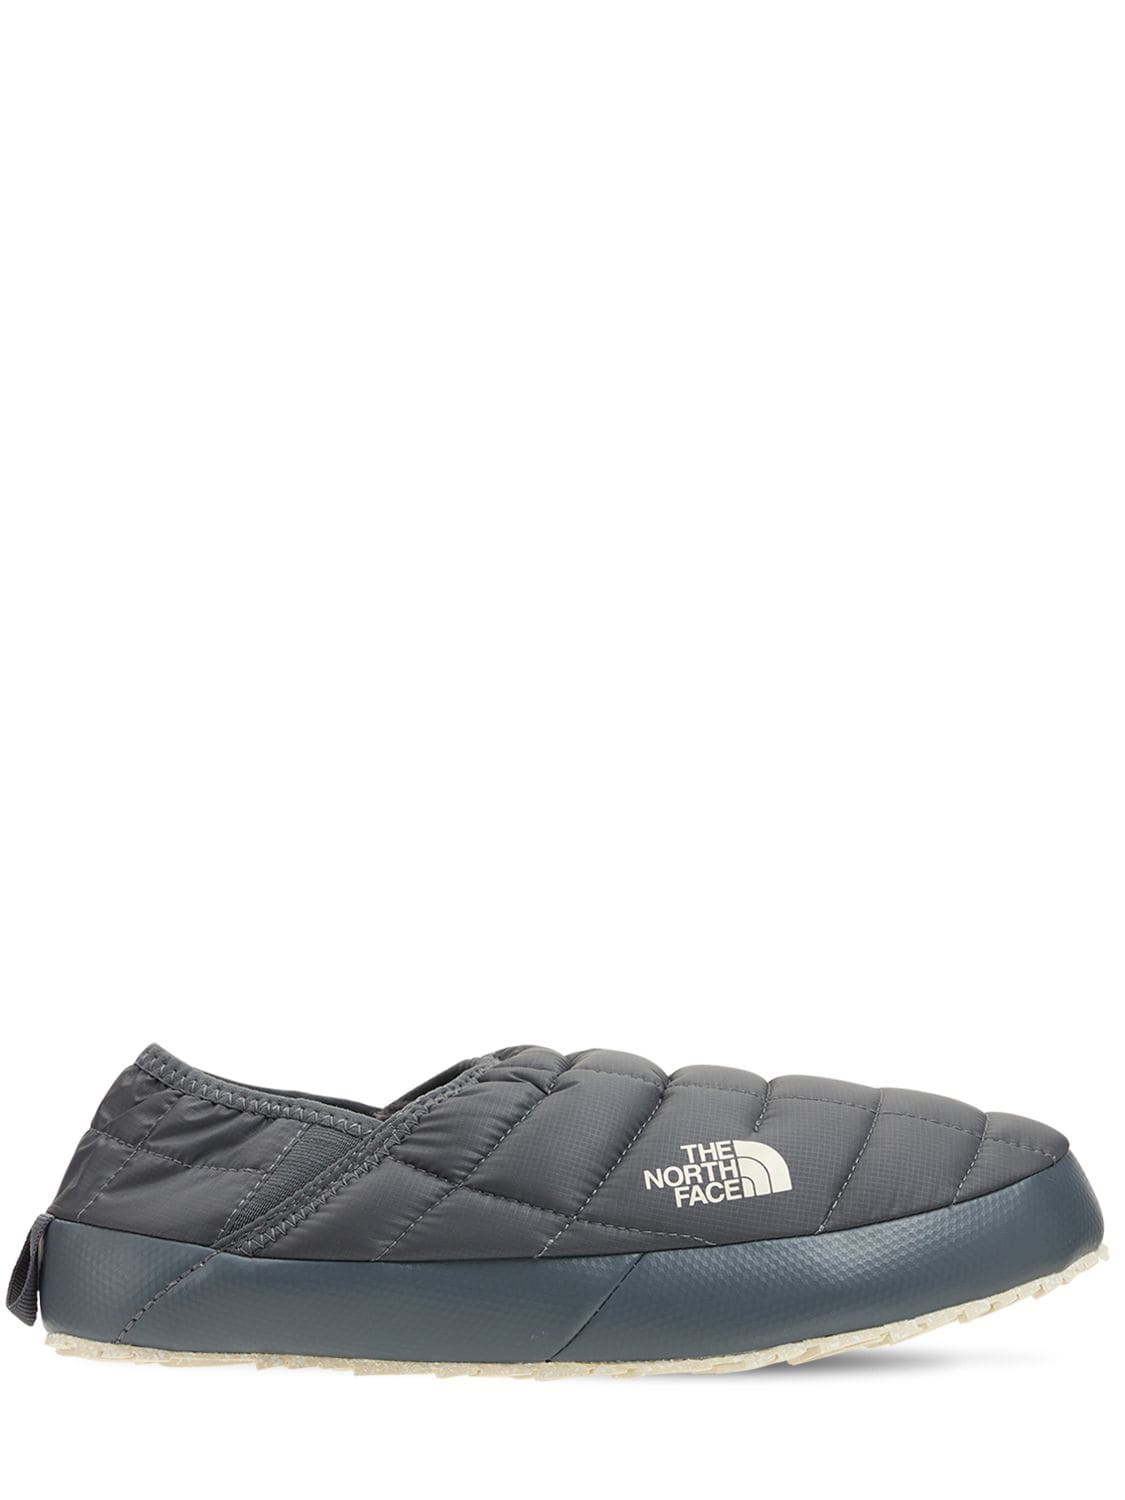 The North Face Thermoball Traction Mules In Grey